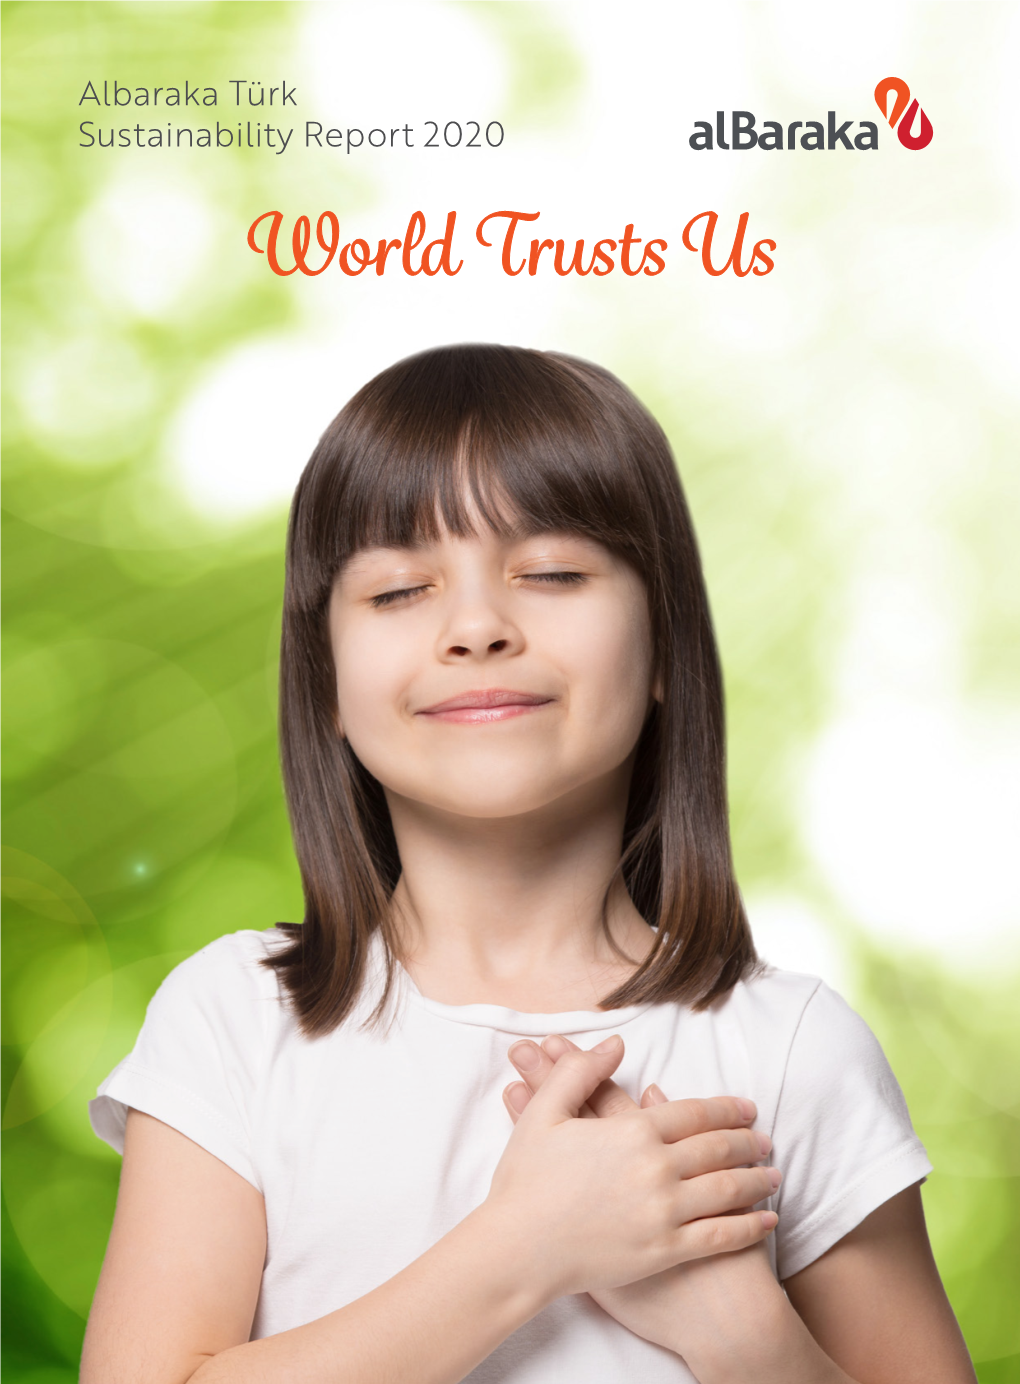 World Trusts Us Contents